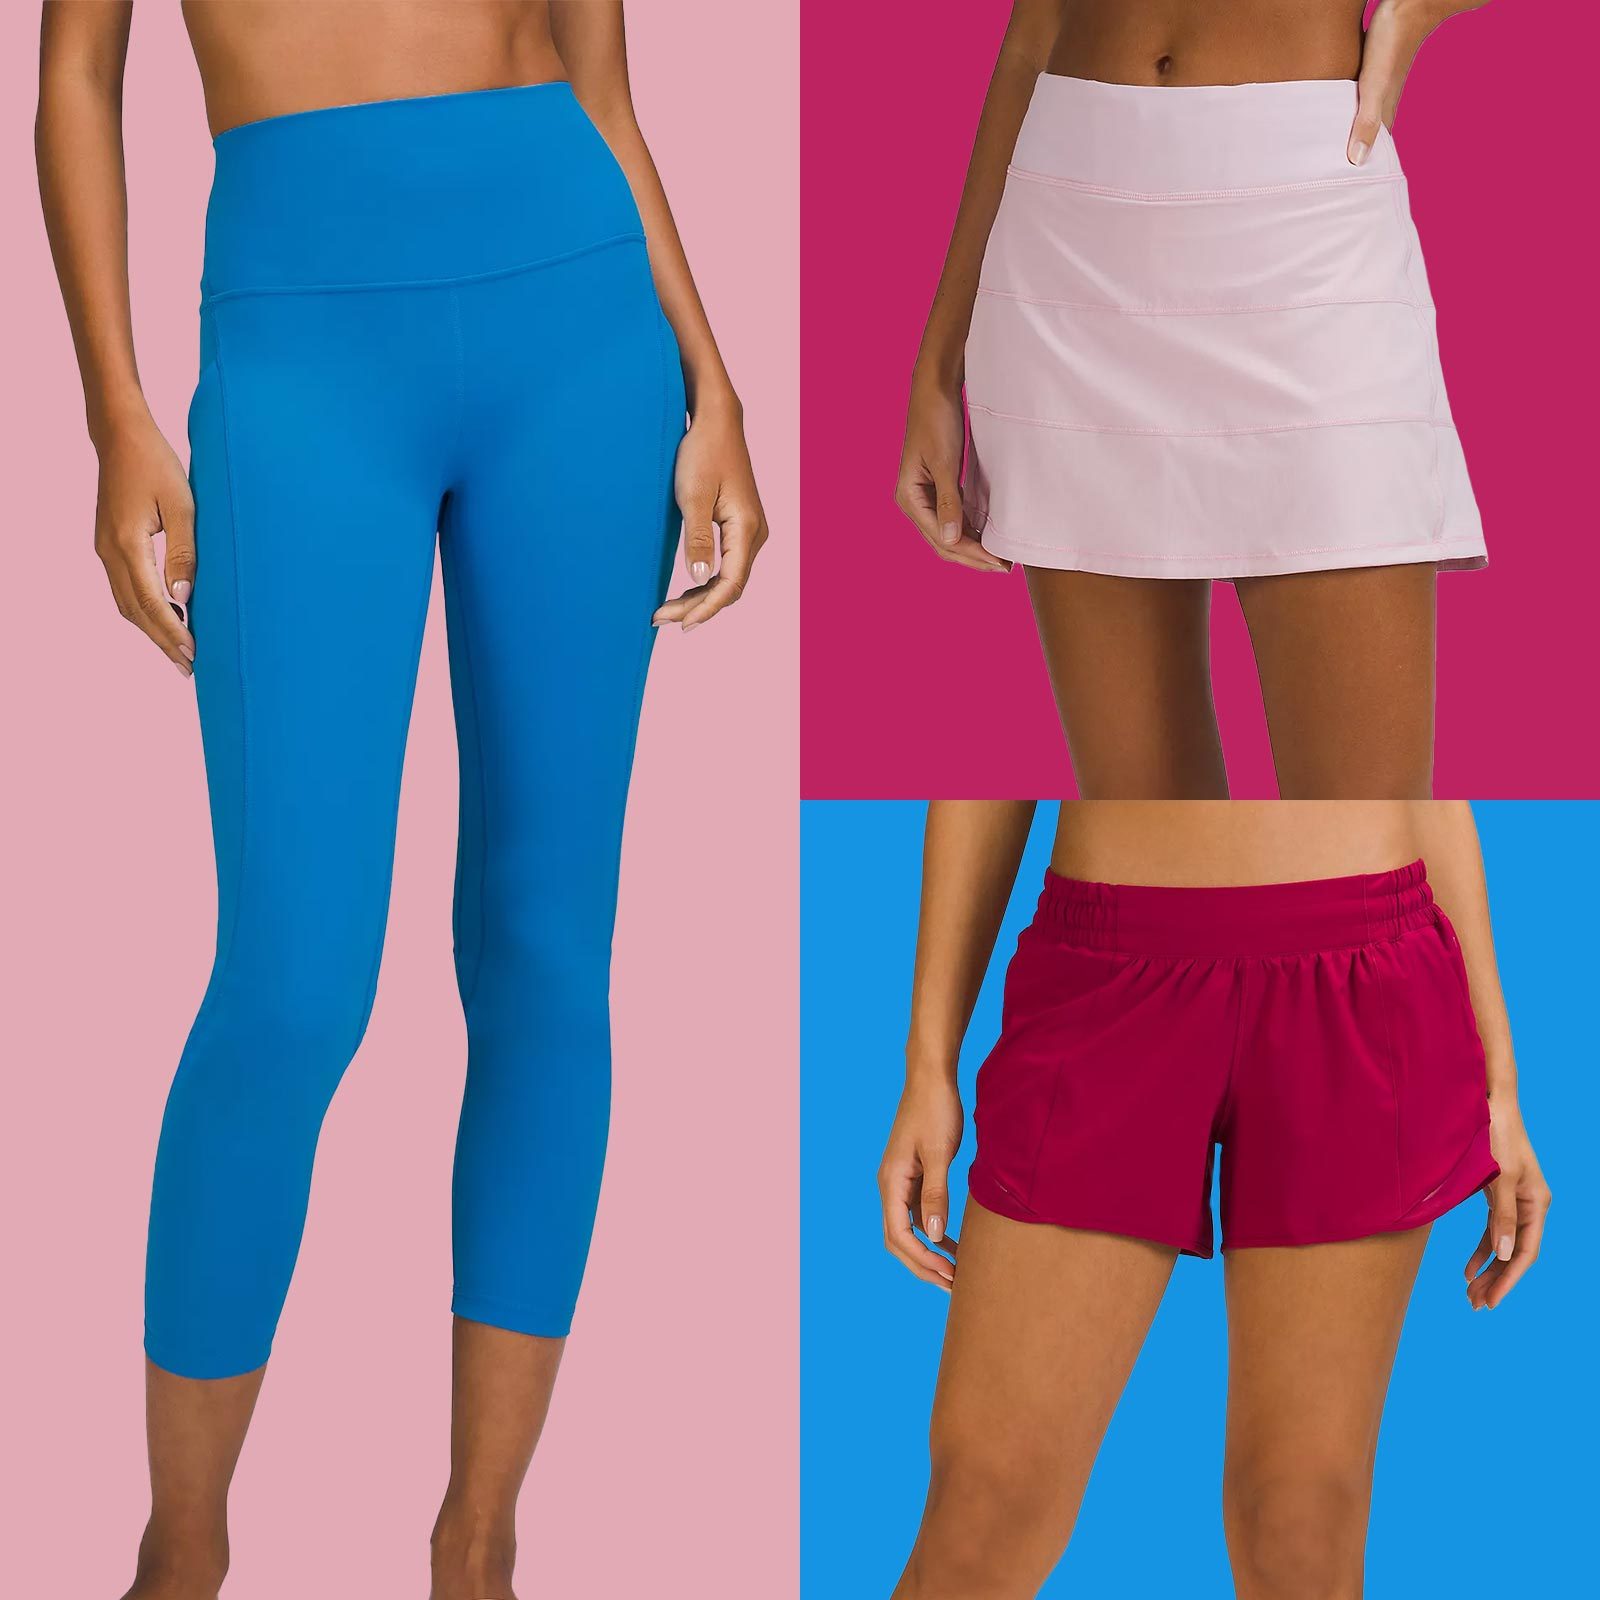 Lululemon Sale: Up to 50% off Our Favourite Align Pants in the Summer Sale